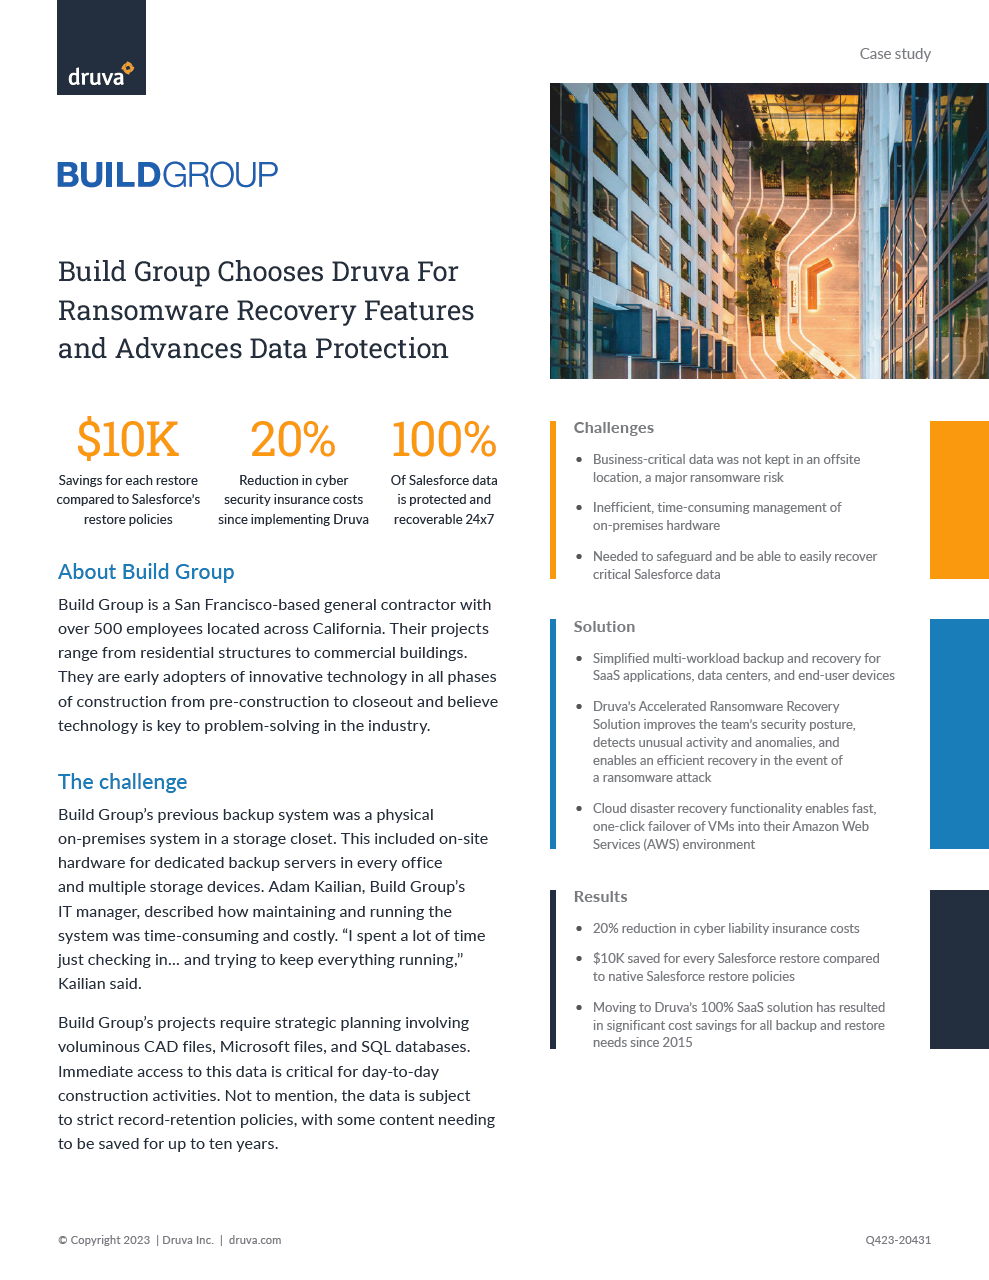 Build Group Chooses Druva For Ransomware Recovery Features and Advances Data Protection